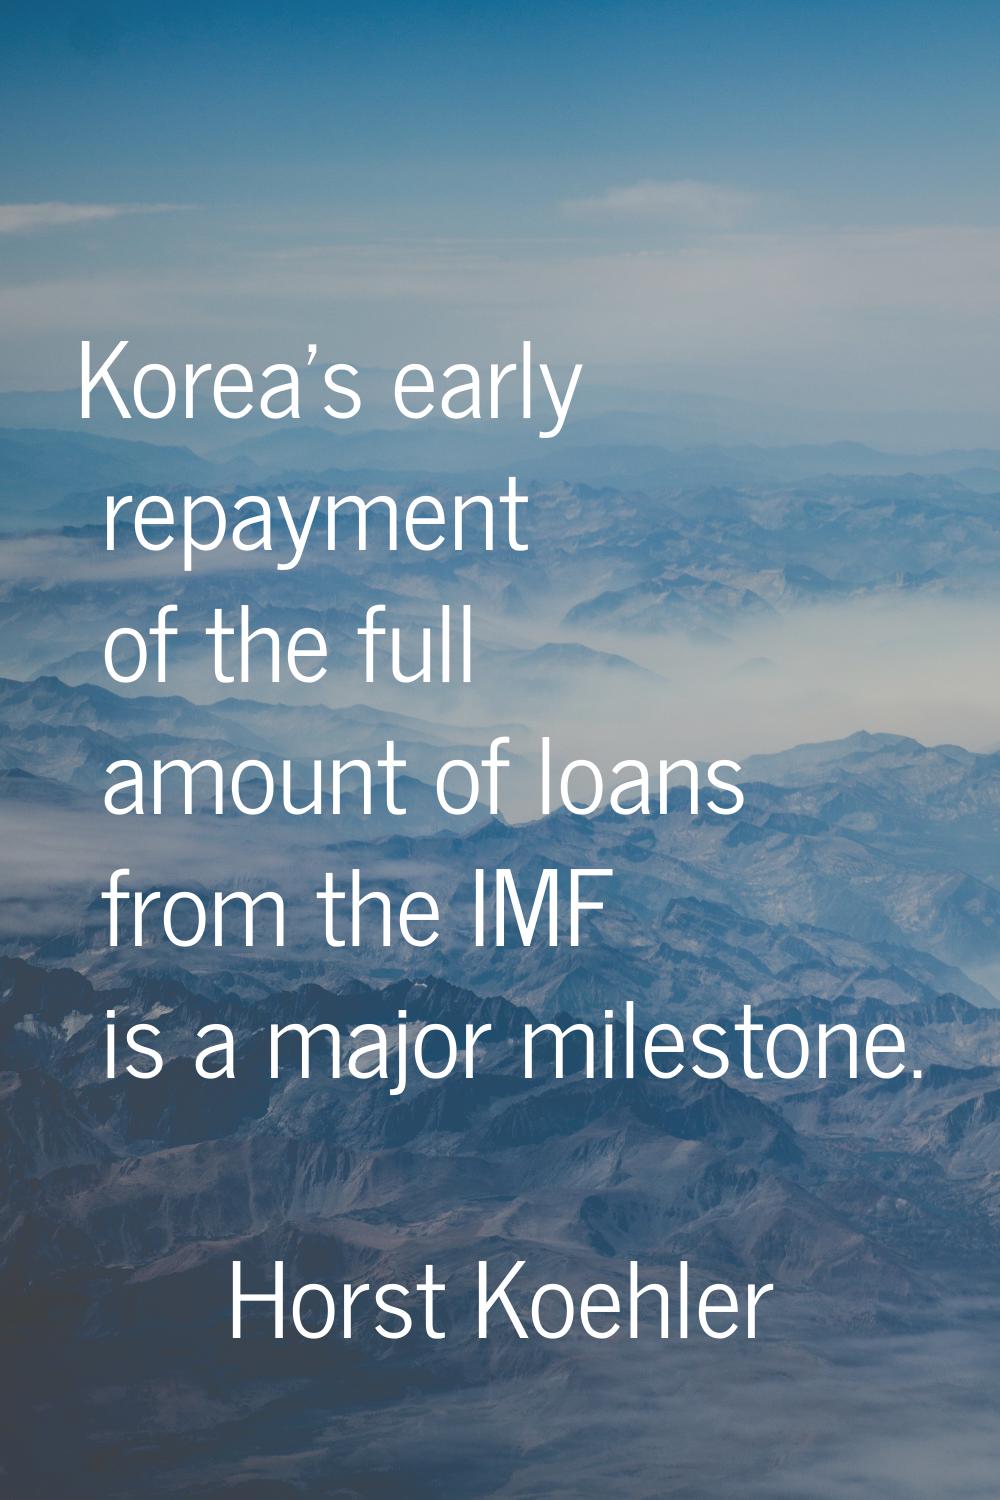 Korea's early repayment of the full amount of loans from the IMF is a major milestone.